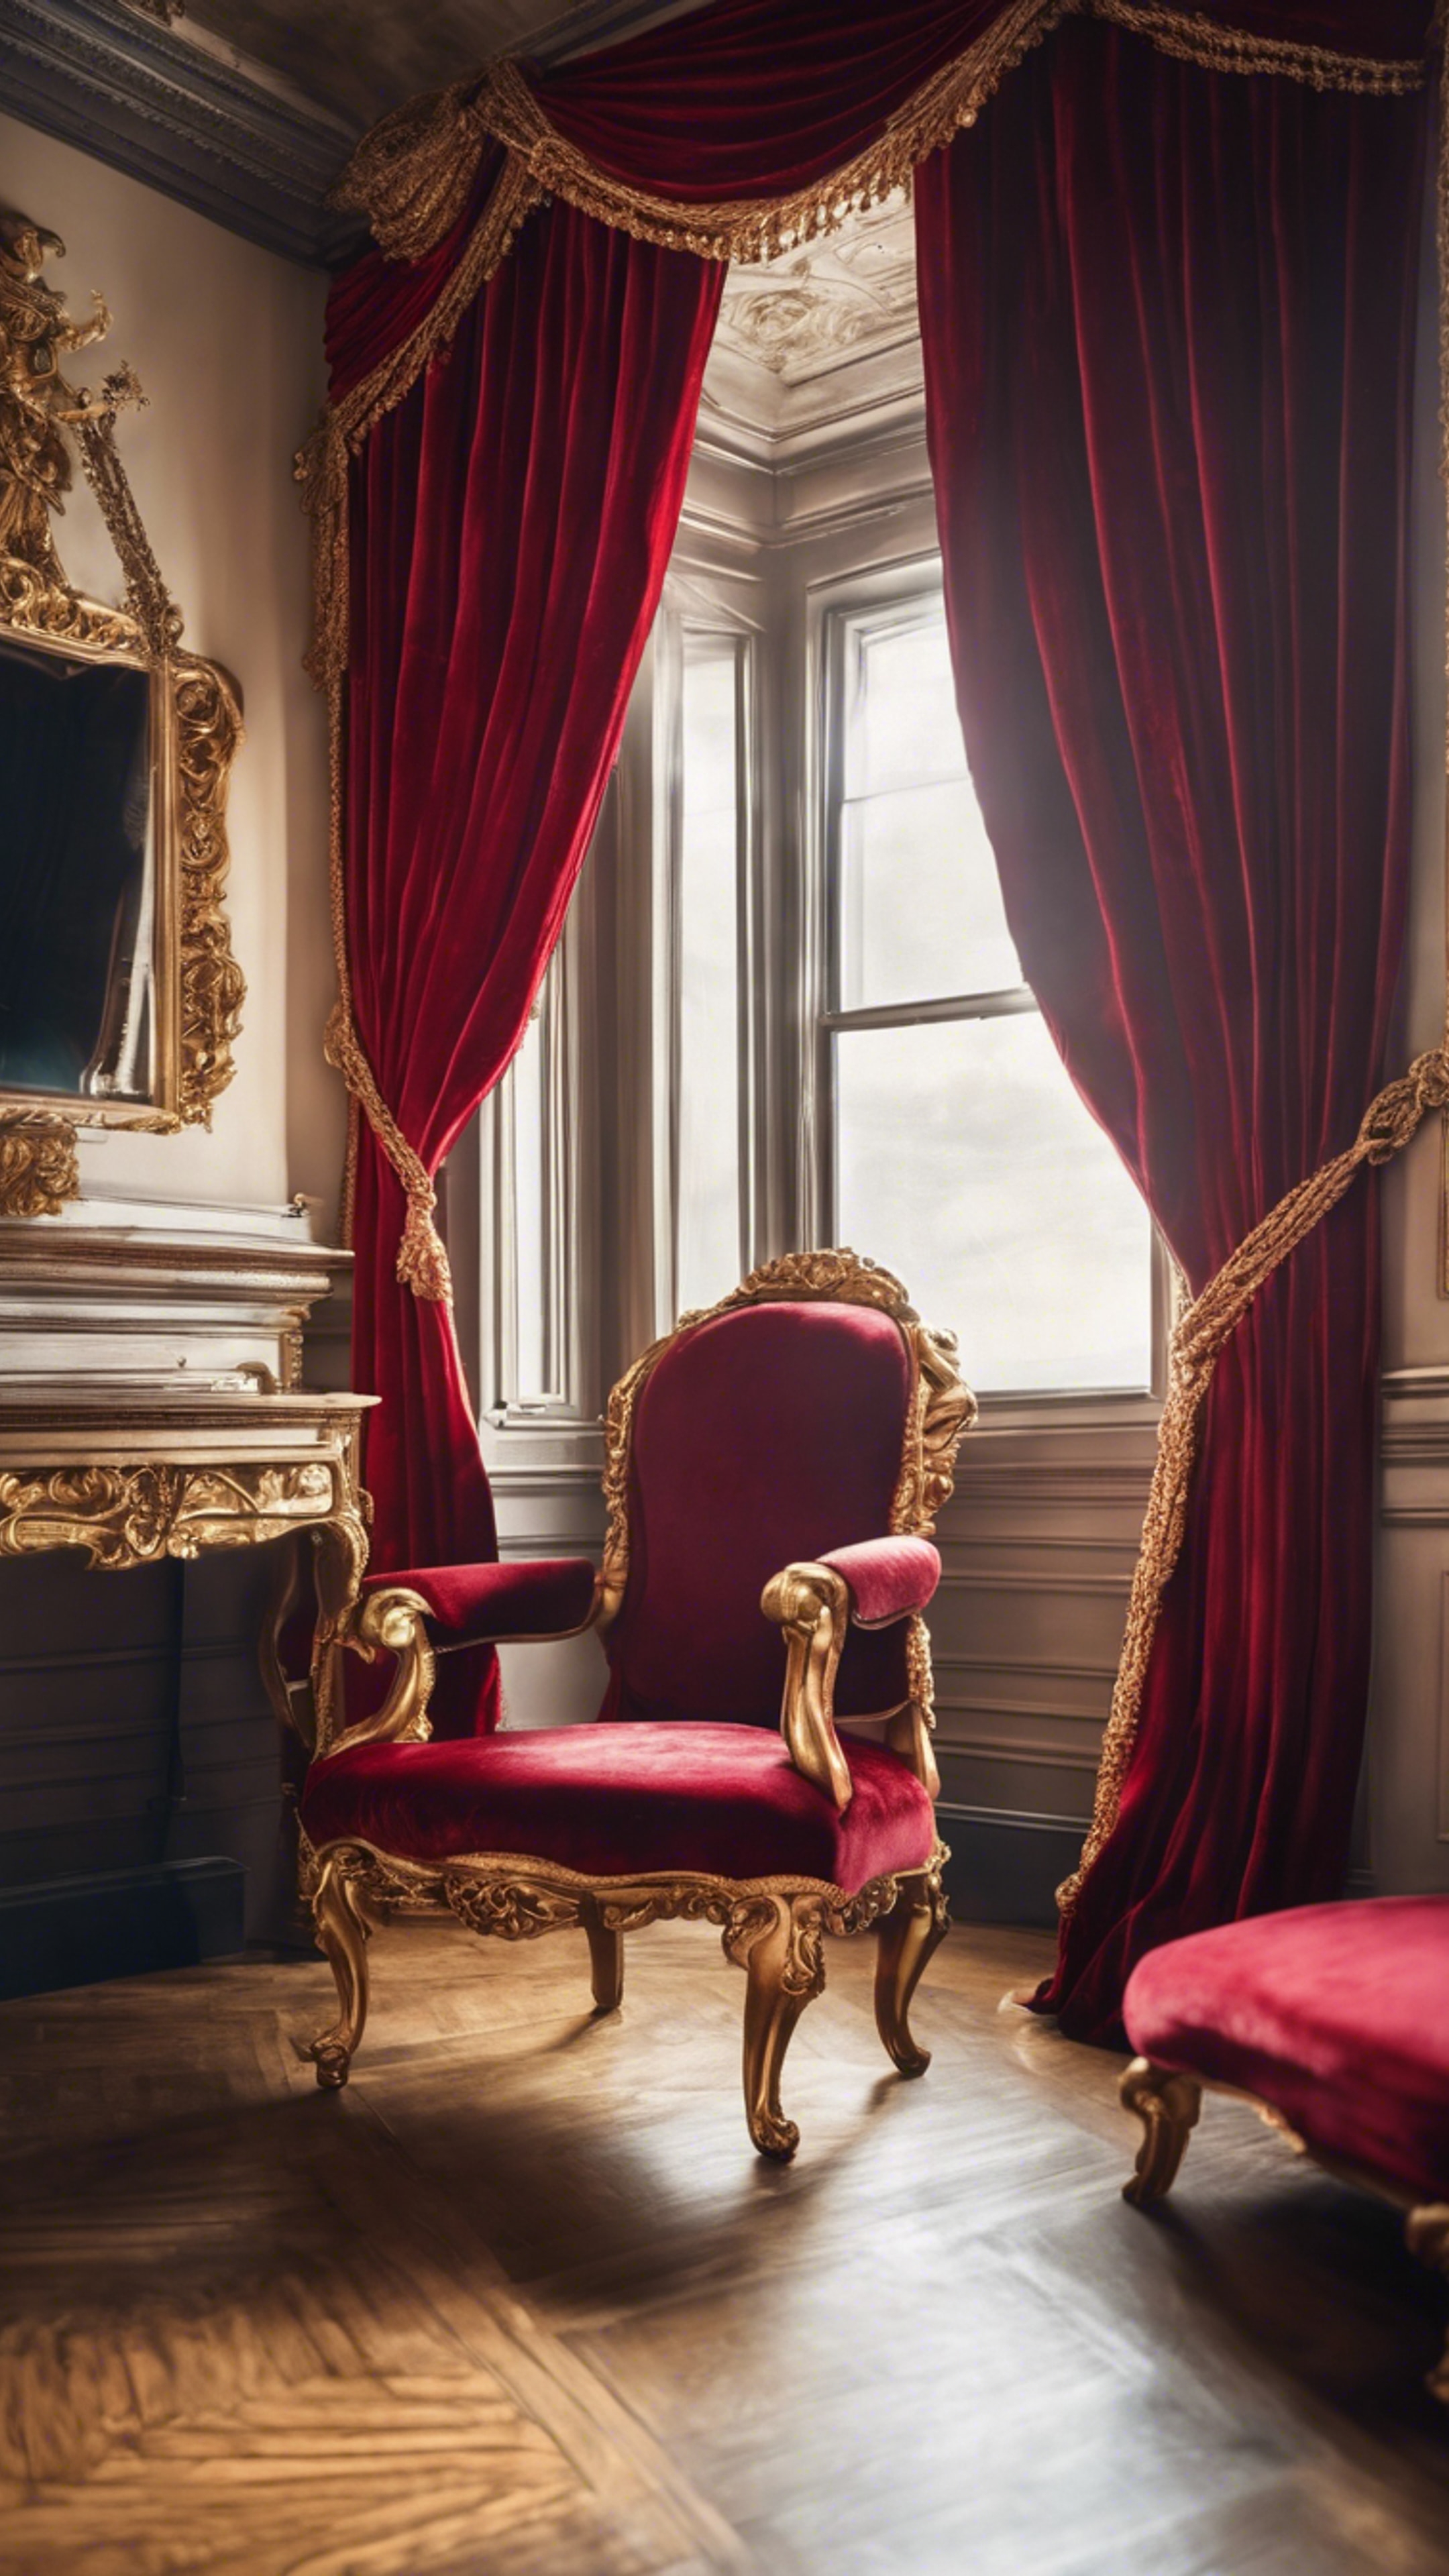 Red velvet drapes tied back with gold ropes in a grand victorian-style living room. 牆紙[6c8dd2a9b4f74c0eb869]